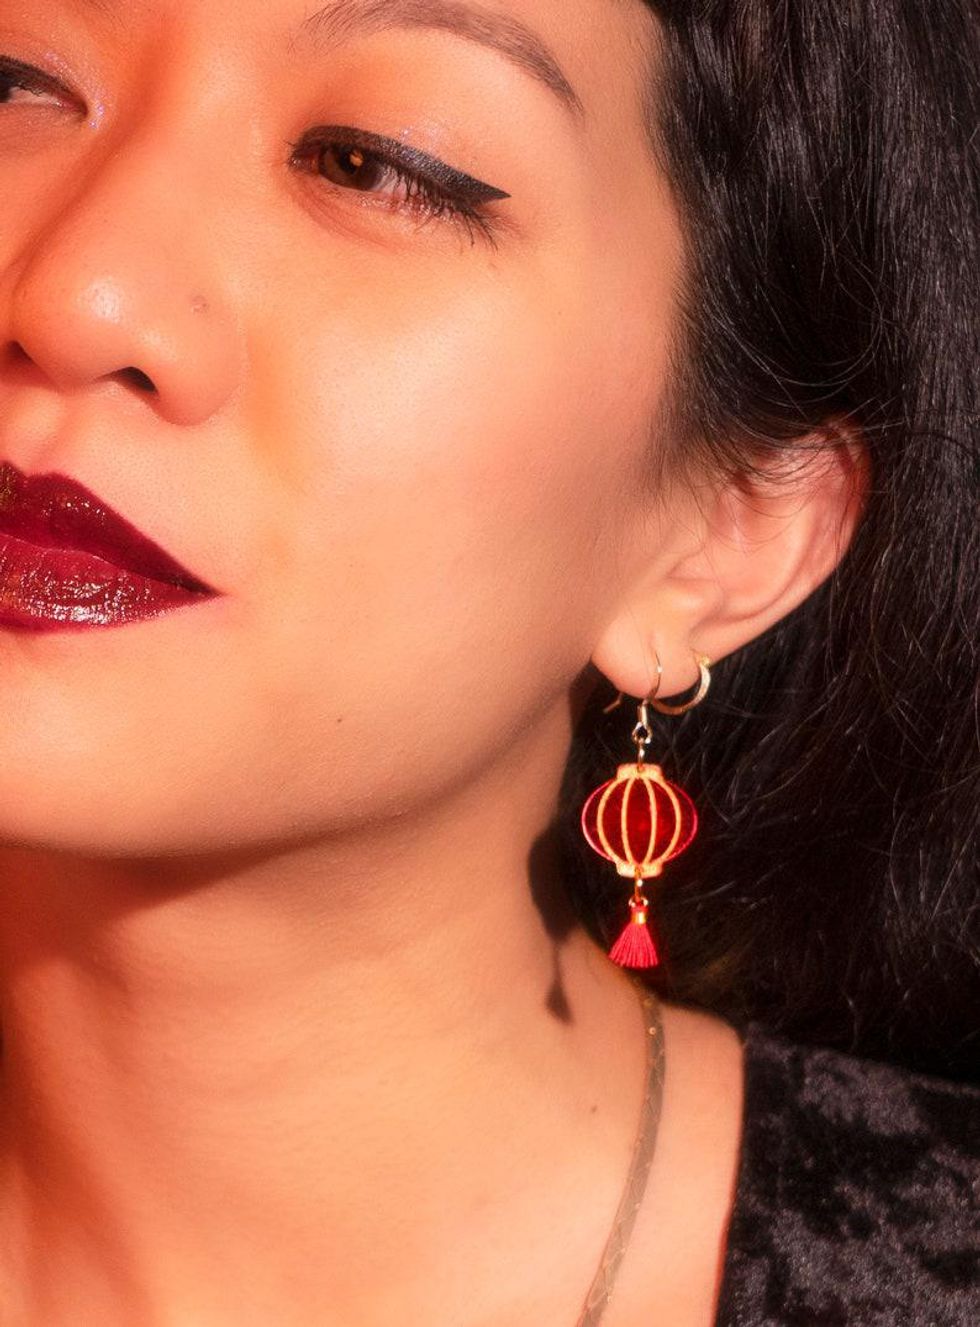 Red Lantern Earrings From ChaoticNeutralNY On Etsy